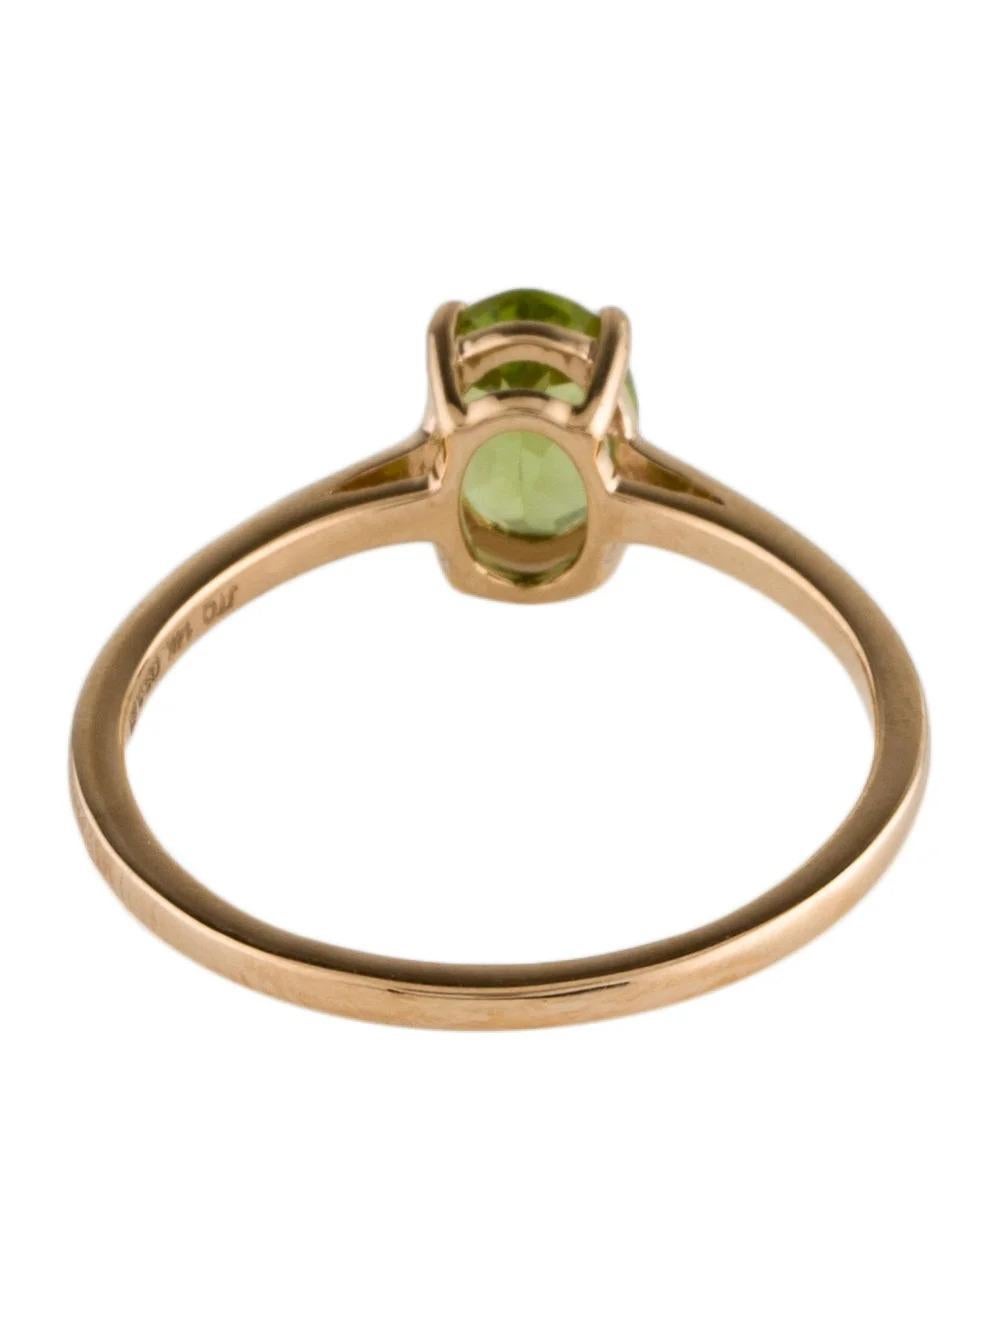 Exquisite 14K Peridot Cocktail Ring Size 6.75 - Timeless Statement Jewelry In New Condition For Sale In Holtsville, NY